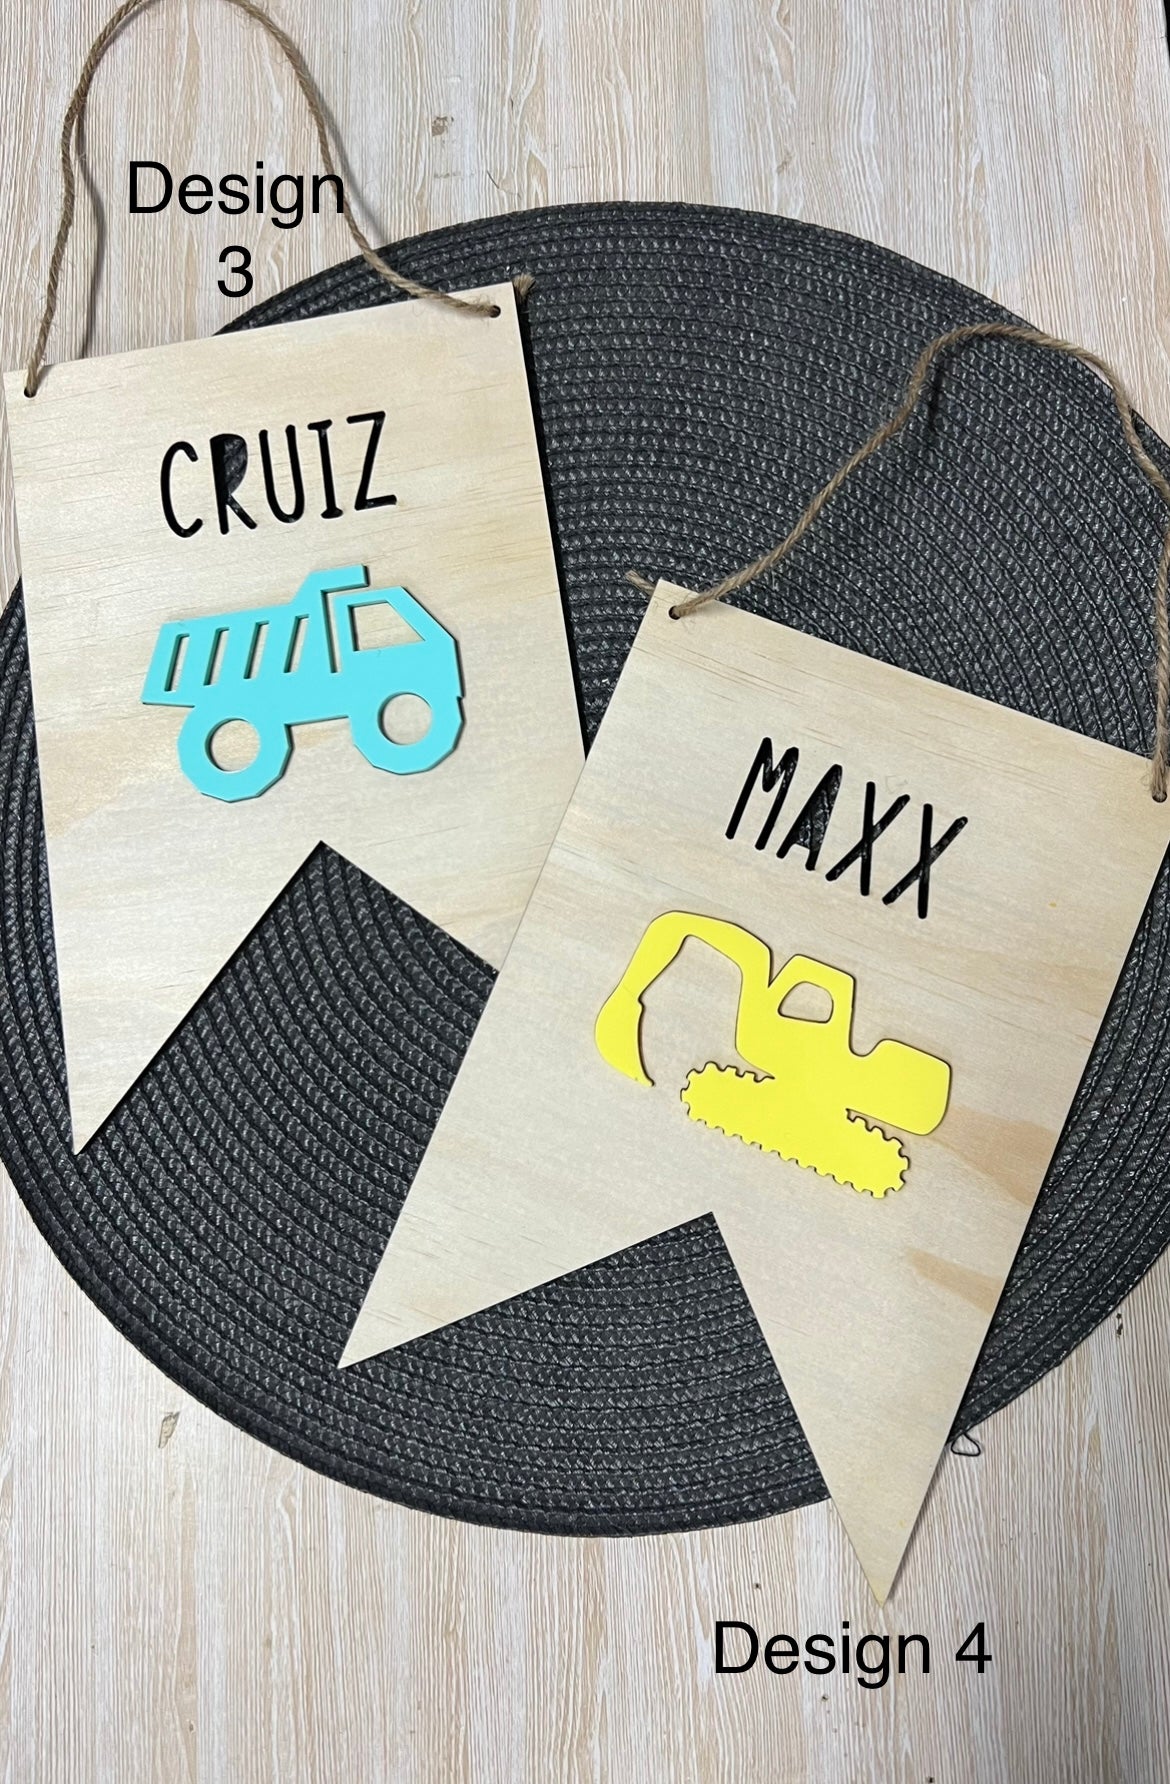 Kids timber name plaques